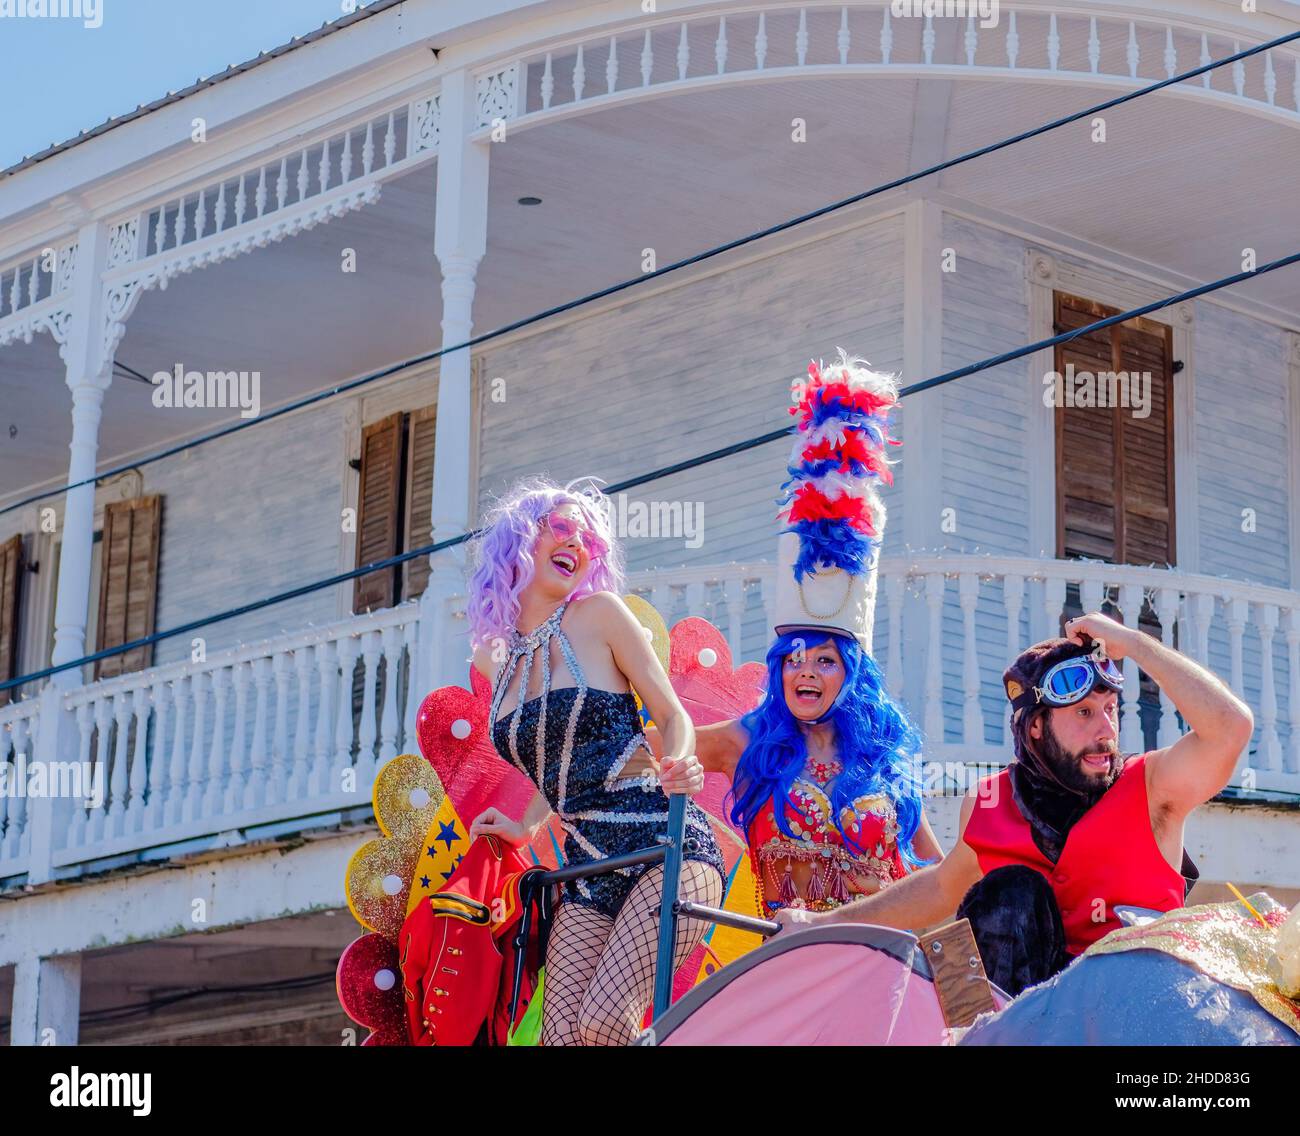 NEW ORLEANS, LA, USA - FEBRUARY 13, 2018: Man and two women riding a float in the St. Anne Parade on Mardi Gras day Stock Photo